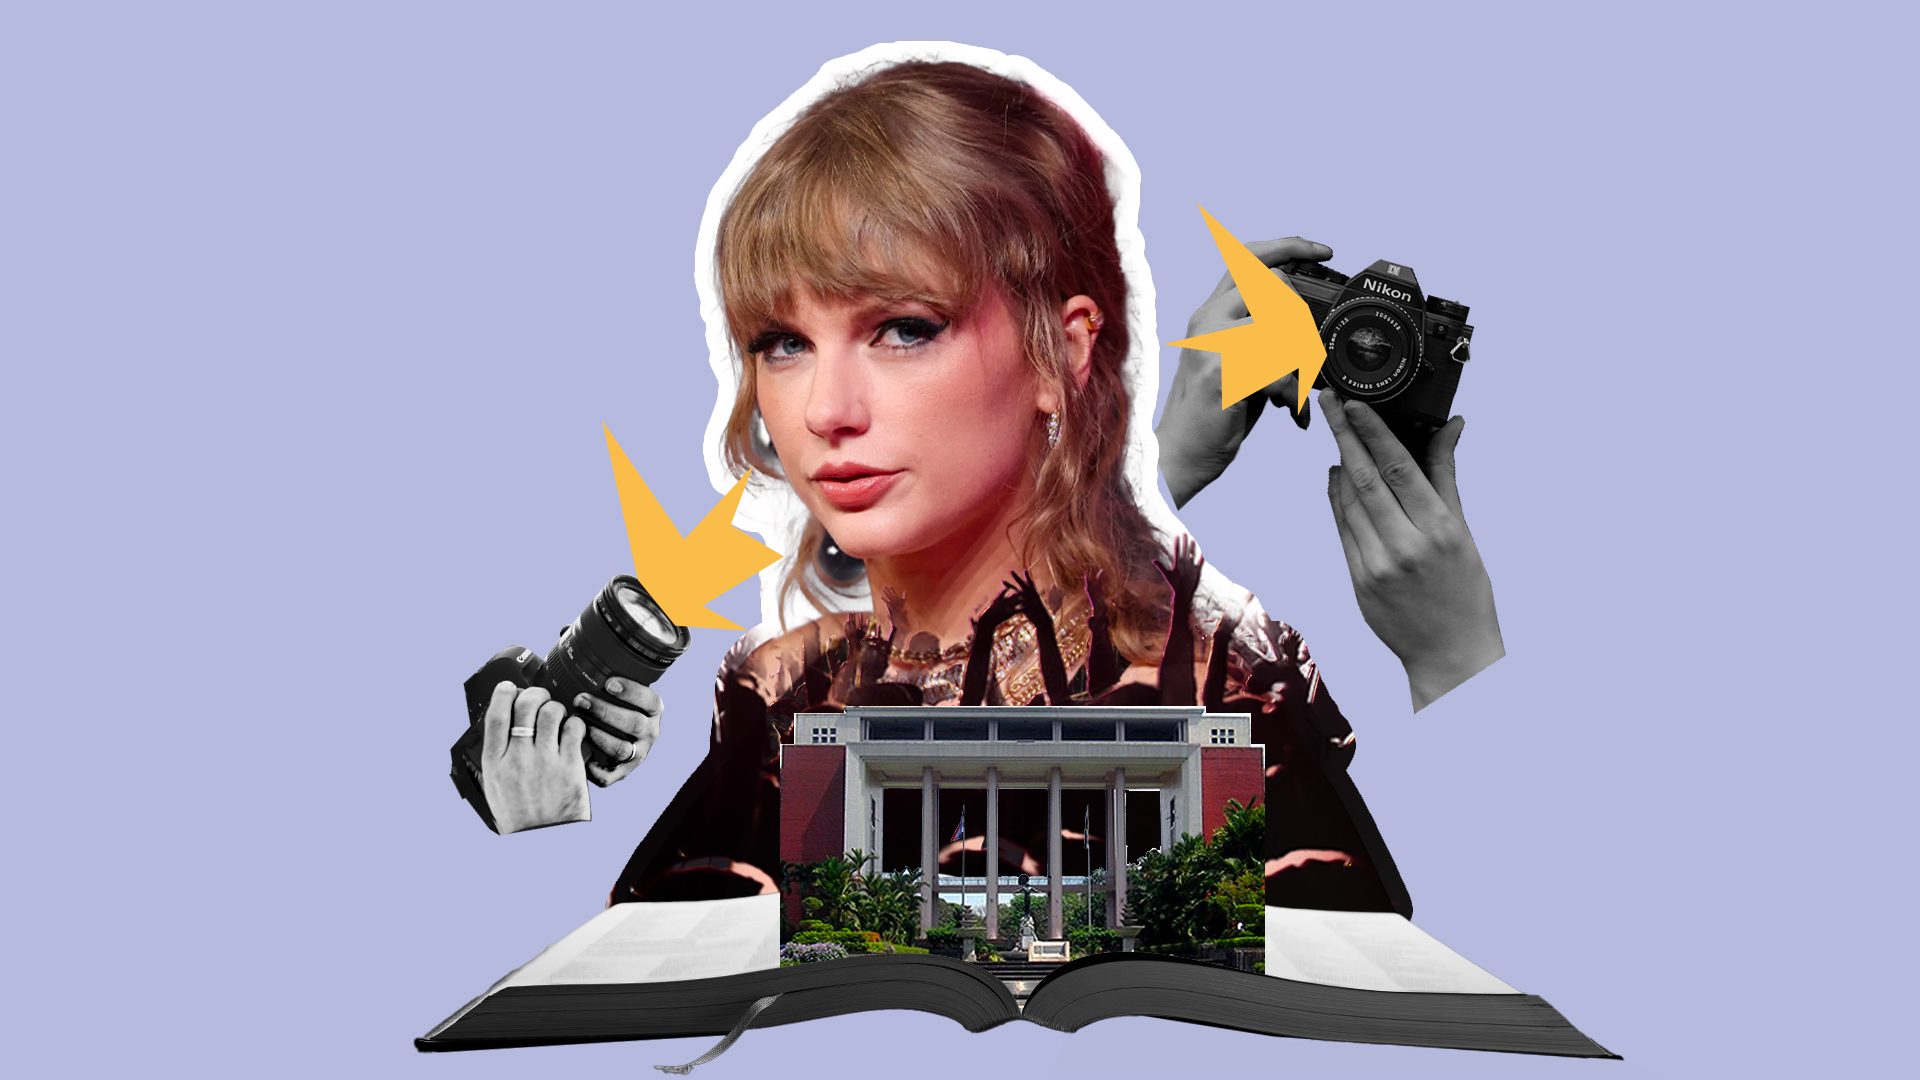 [OPINION] Taylor-made: Why the UP course on Taylor Swift need not be so polarizing